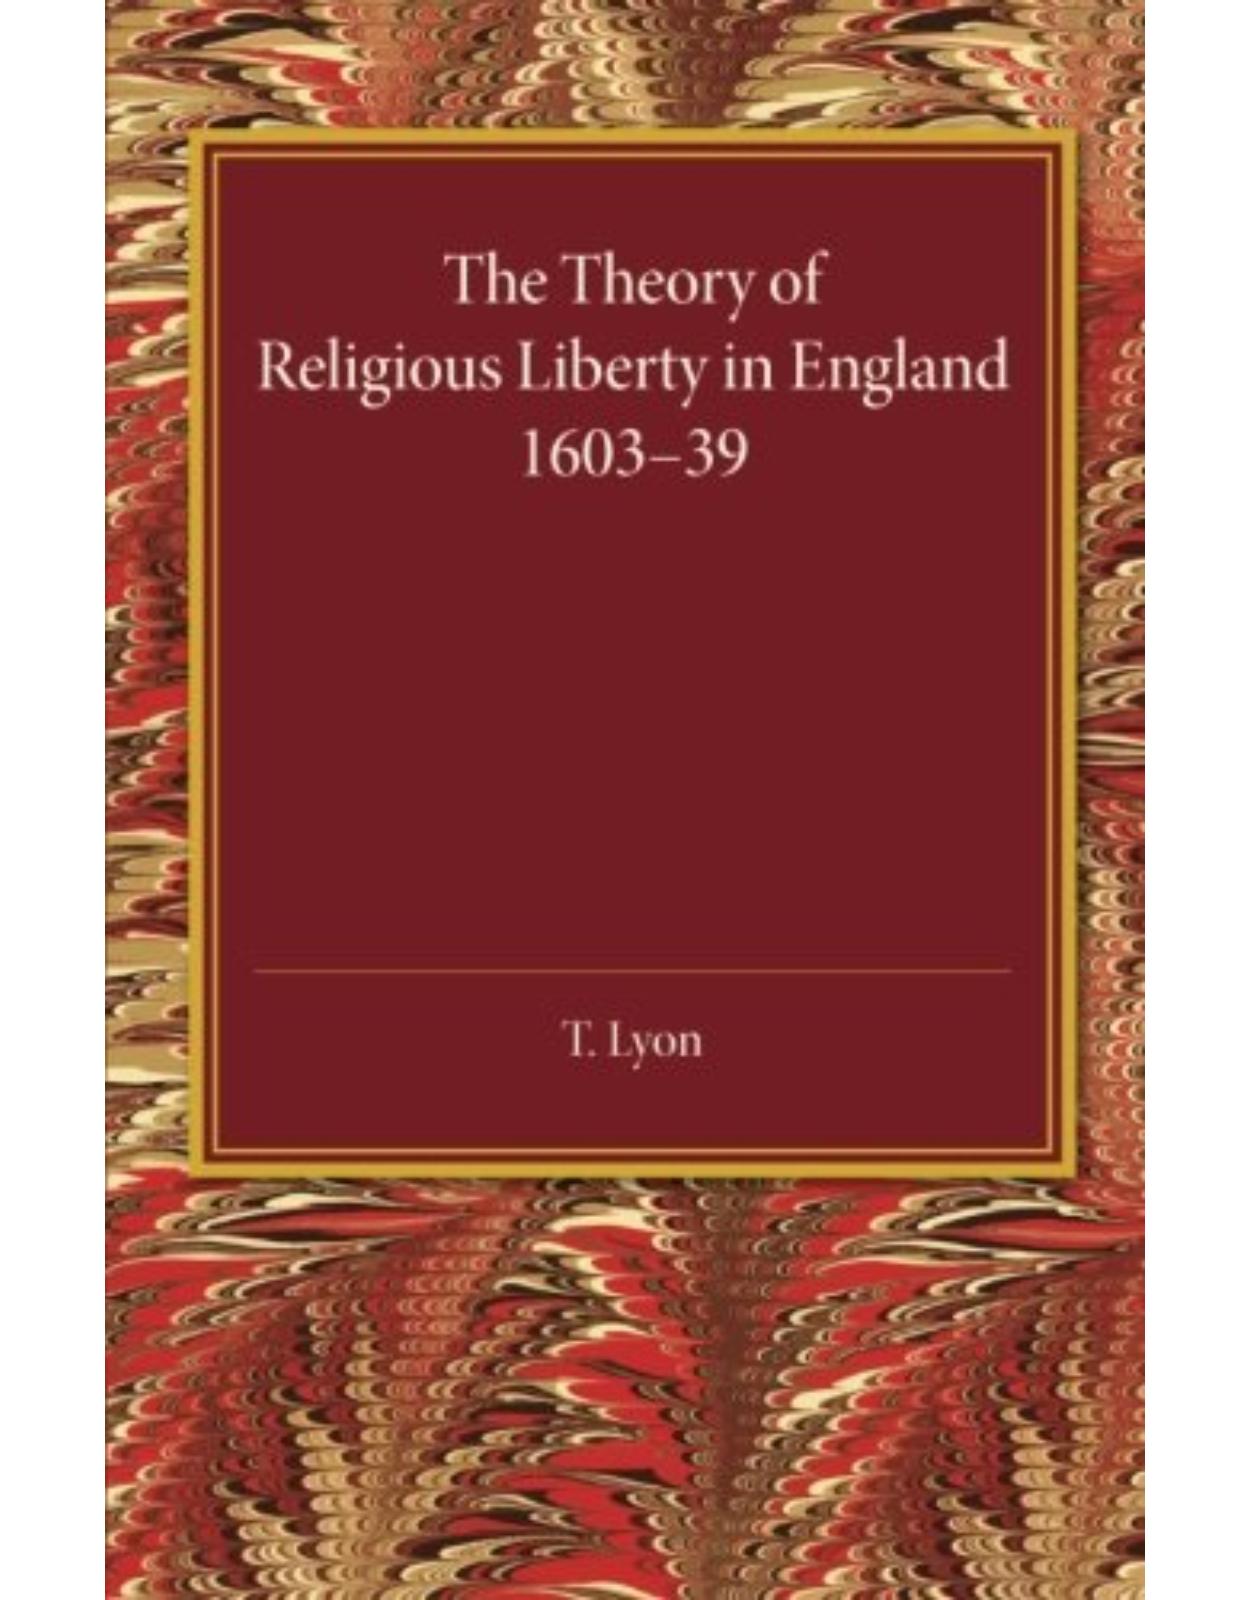 The Theory of Religious Liberty in England 1603-39